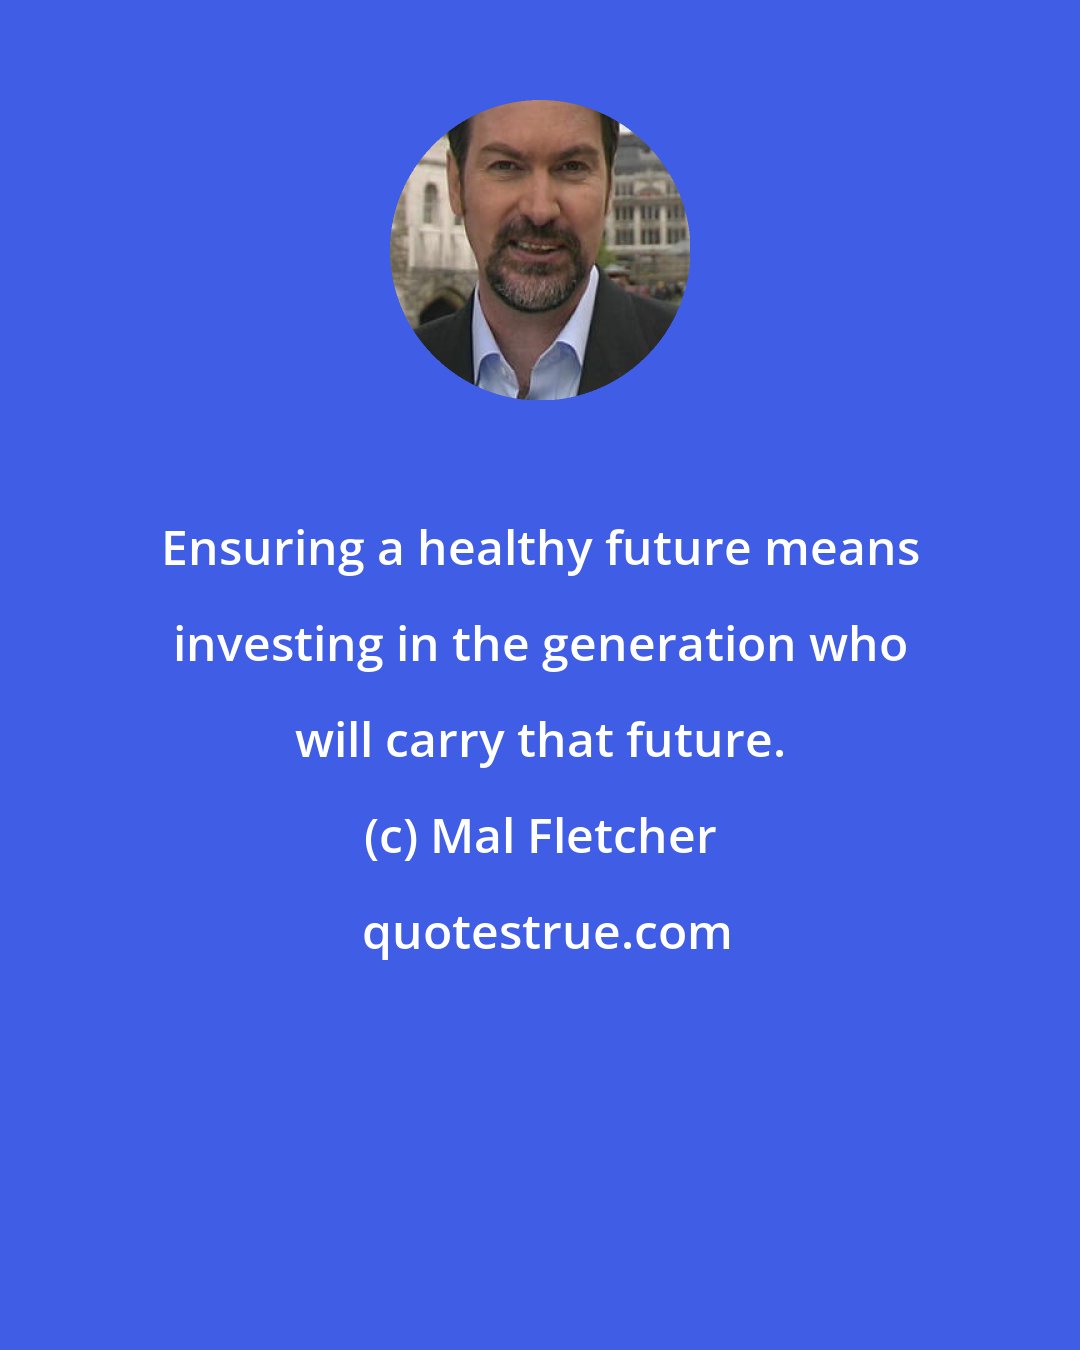 Mal Fletcher: Ensuring a healthy future means investing in the generation who will carry that future.